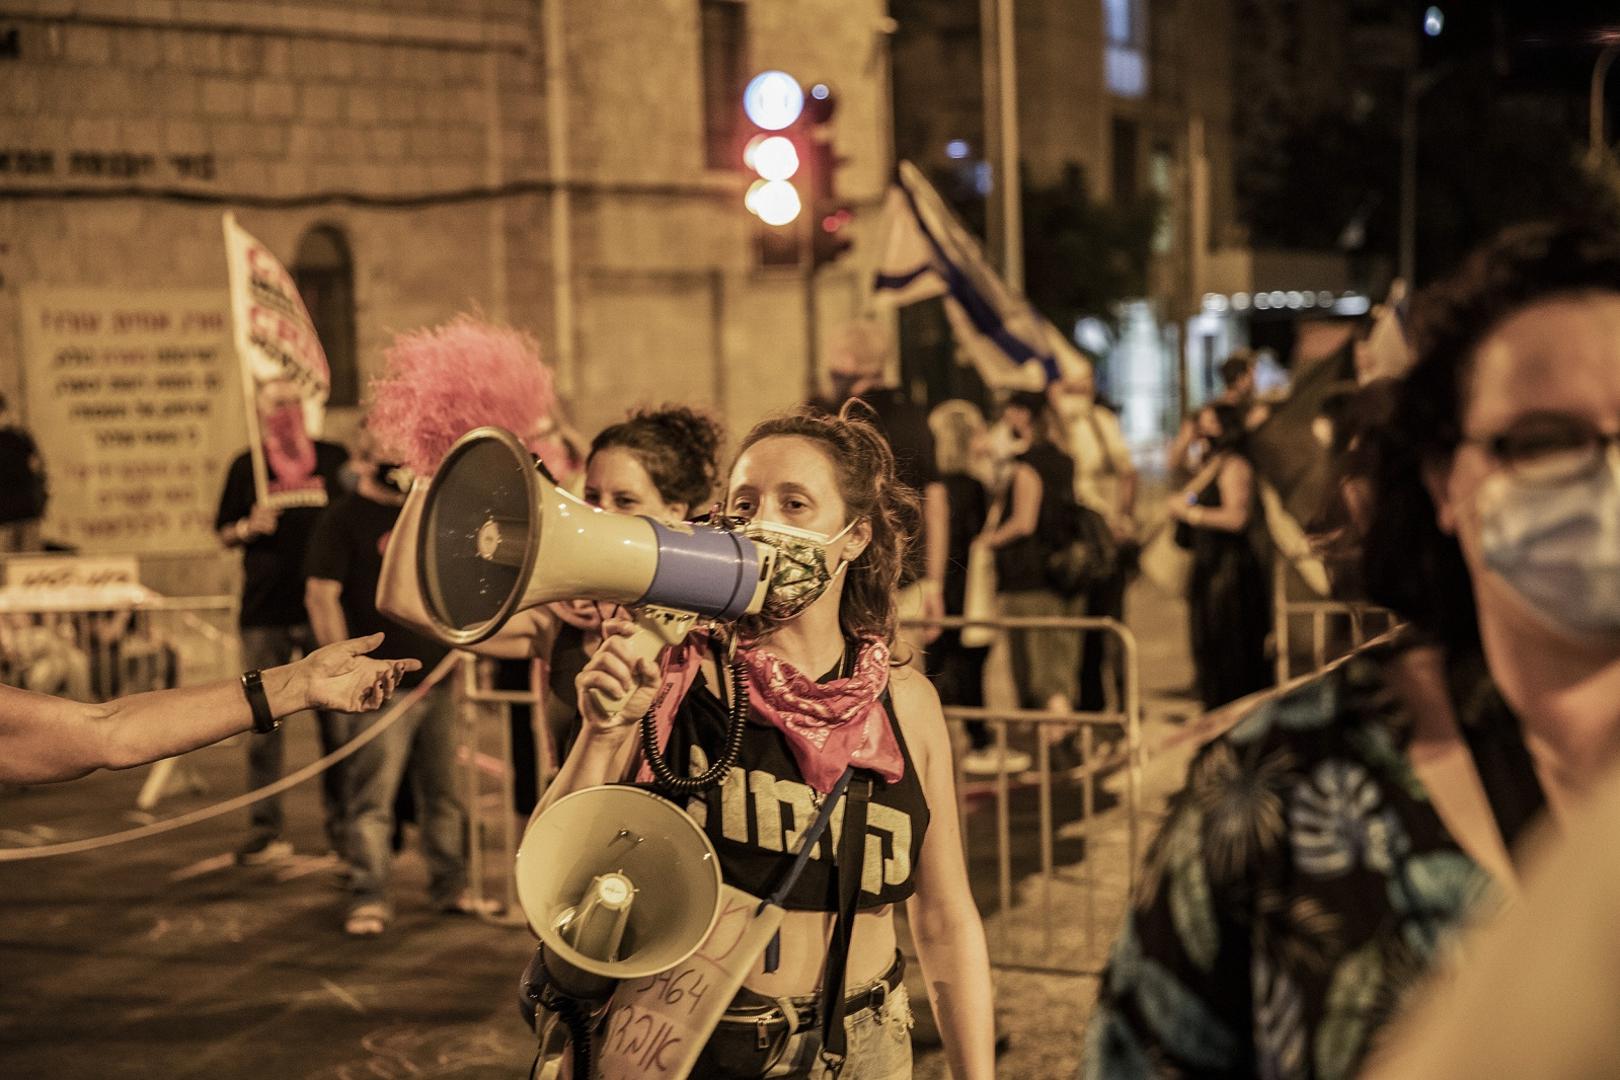 20 September 2020, Israel, Jerusalem: A woman uses a megaphone to shout slogans during an anti-government demonstration against corruption outside the residence of Israeli Prime Minister Benjamin Netanyahu. Photo: Ilia Yefimovich/dpa /DPA/PIXSELL